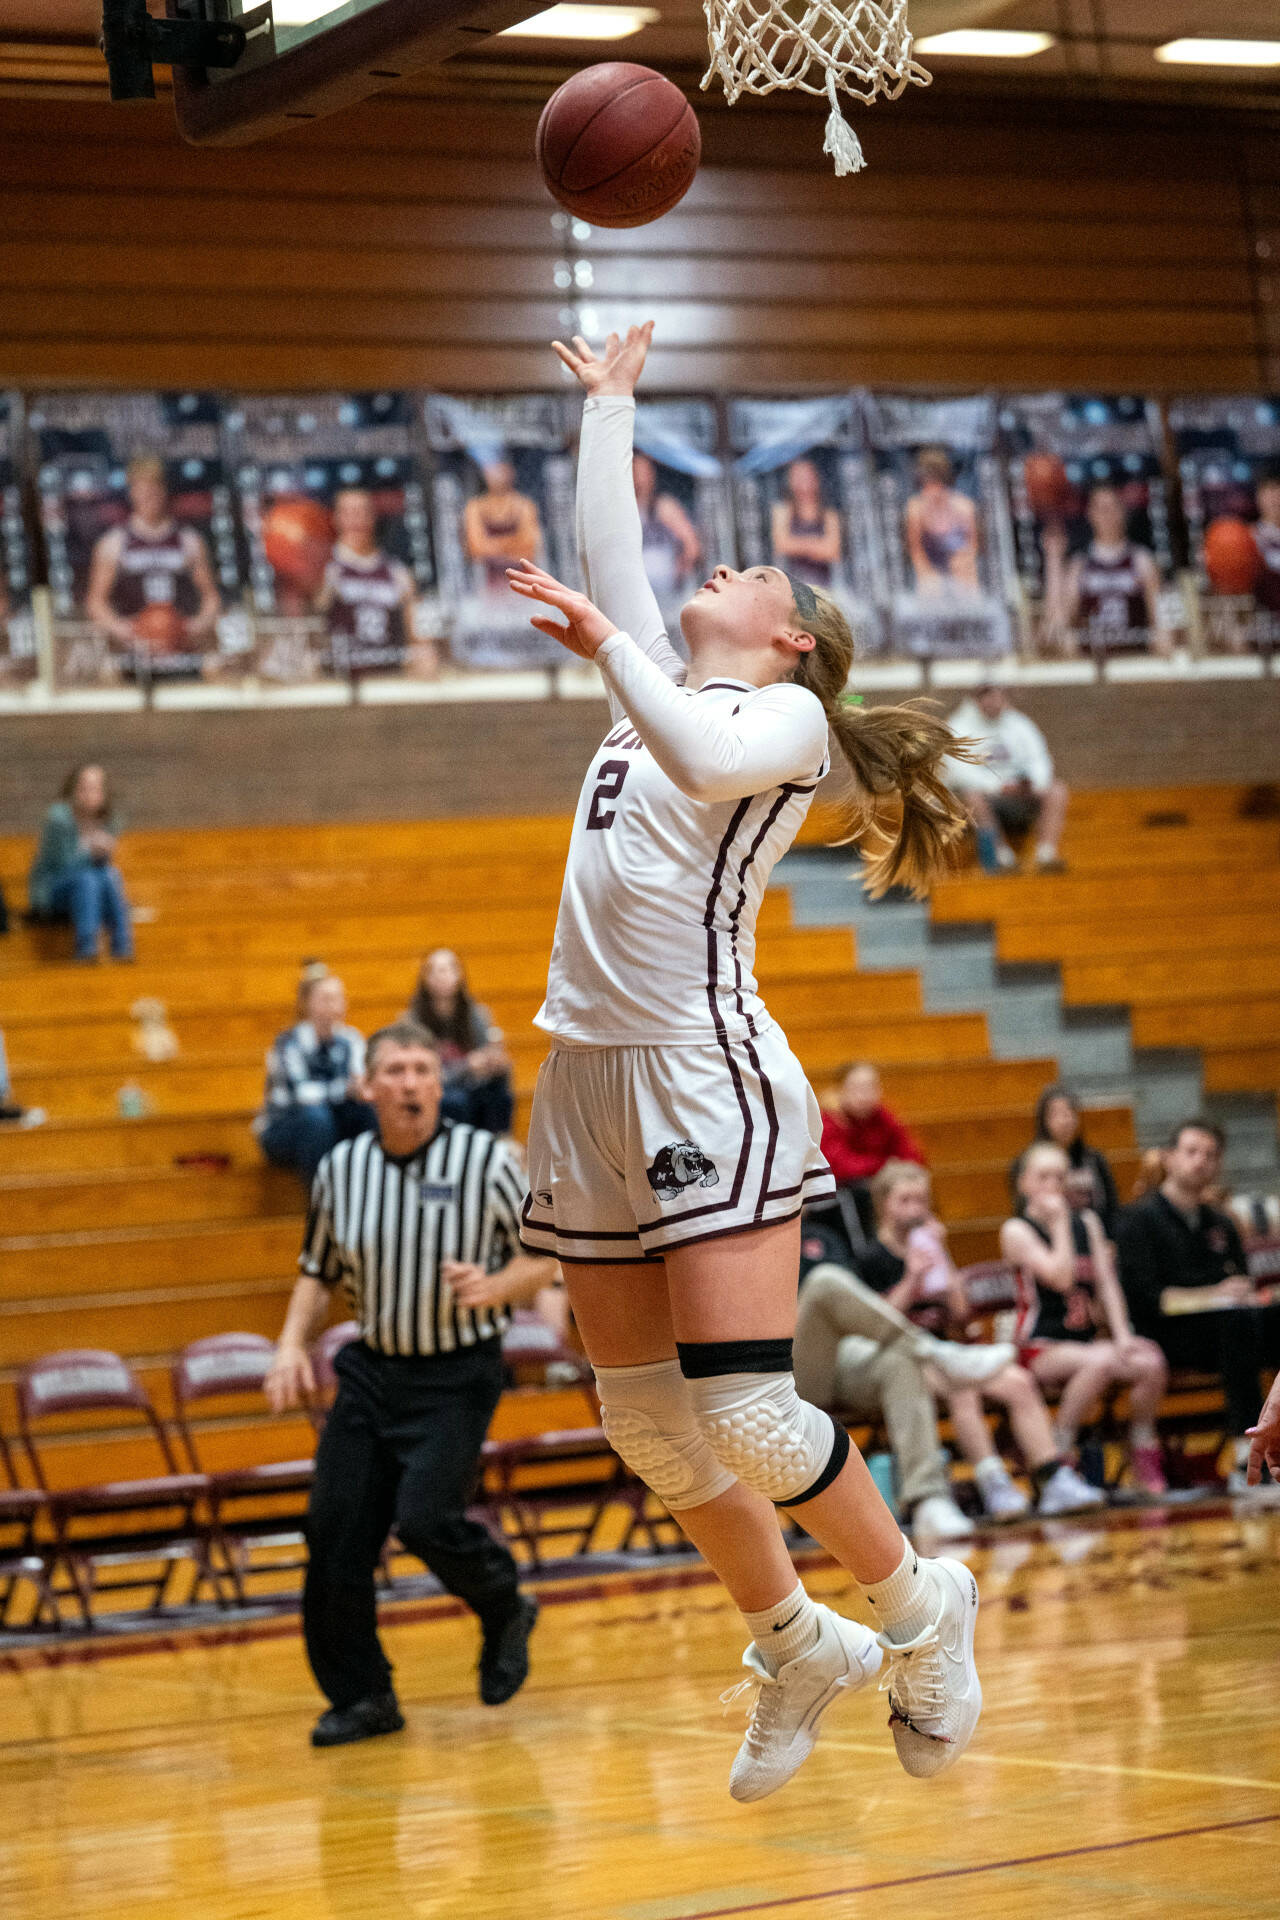 PHOTO BY FOREST WORGUM Montesano guard Tieander Olson glides to the basket to score two of her game-high 18 points in a 51-11 win over Tenino on Wednesday in Montesano.